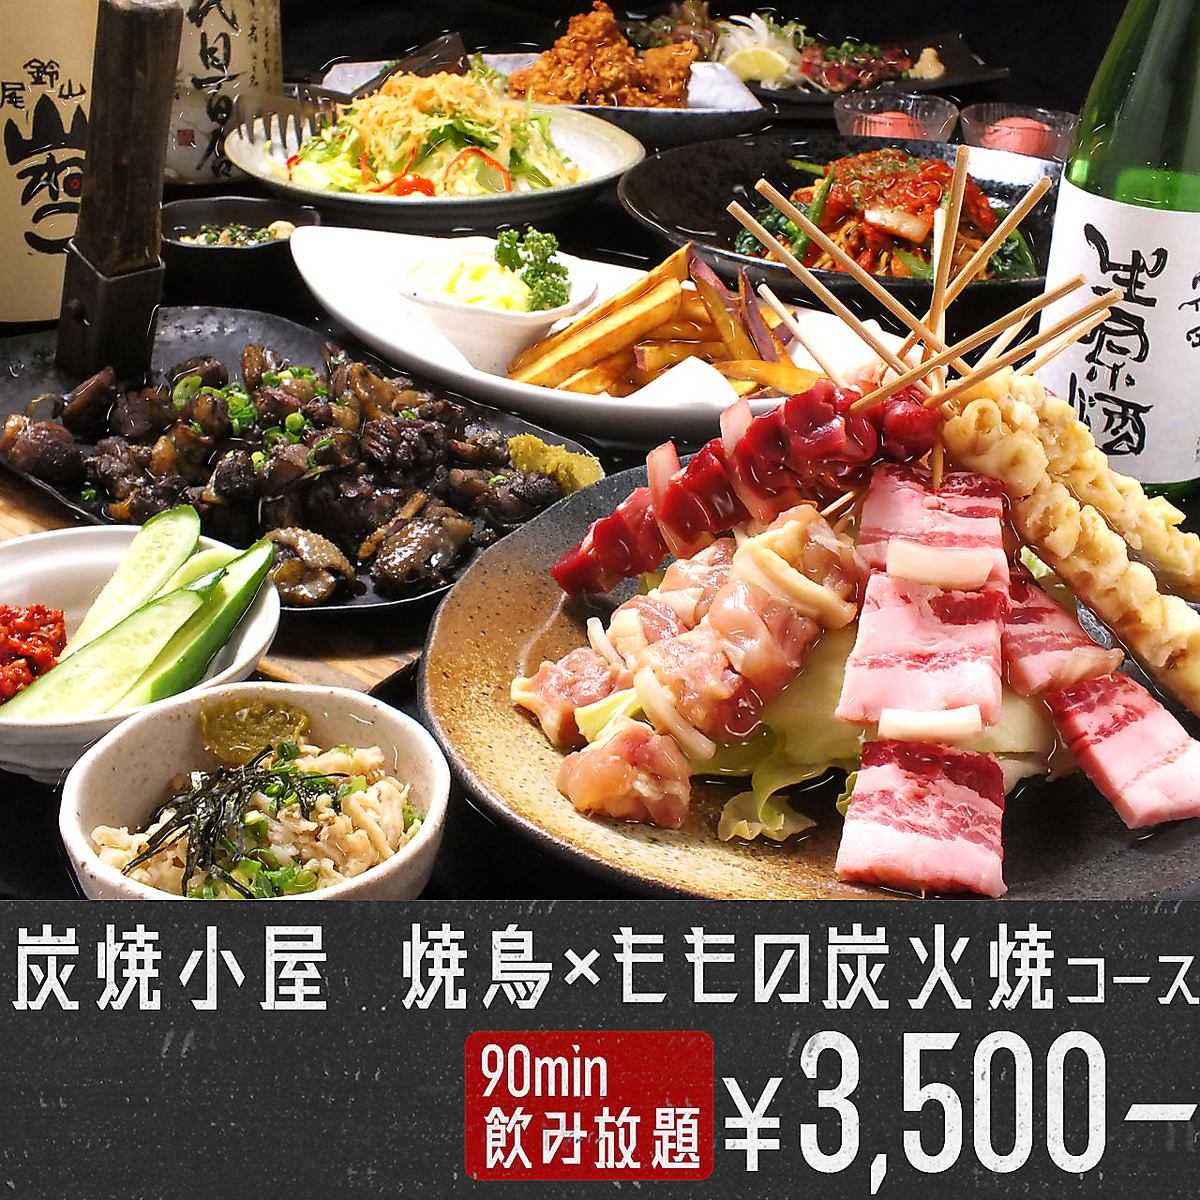 It's just delicious! The 3,500 yen course includes the famous charcoal-grilled thigh and includes 90 minutes of all-you-can-drink!